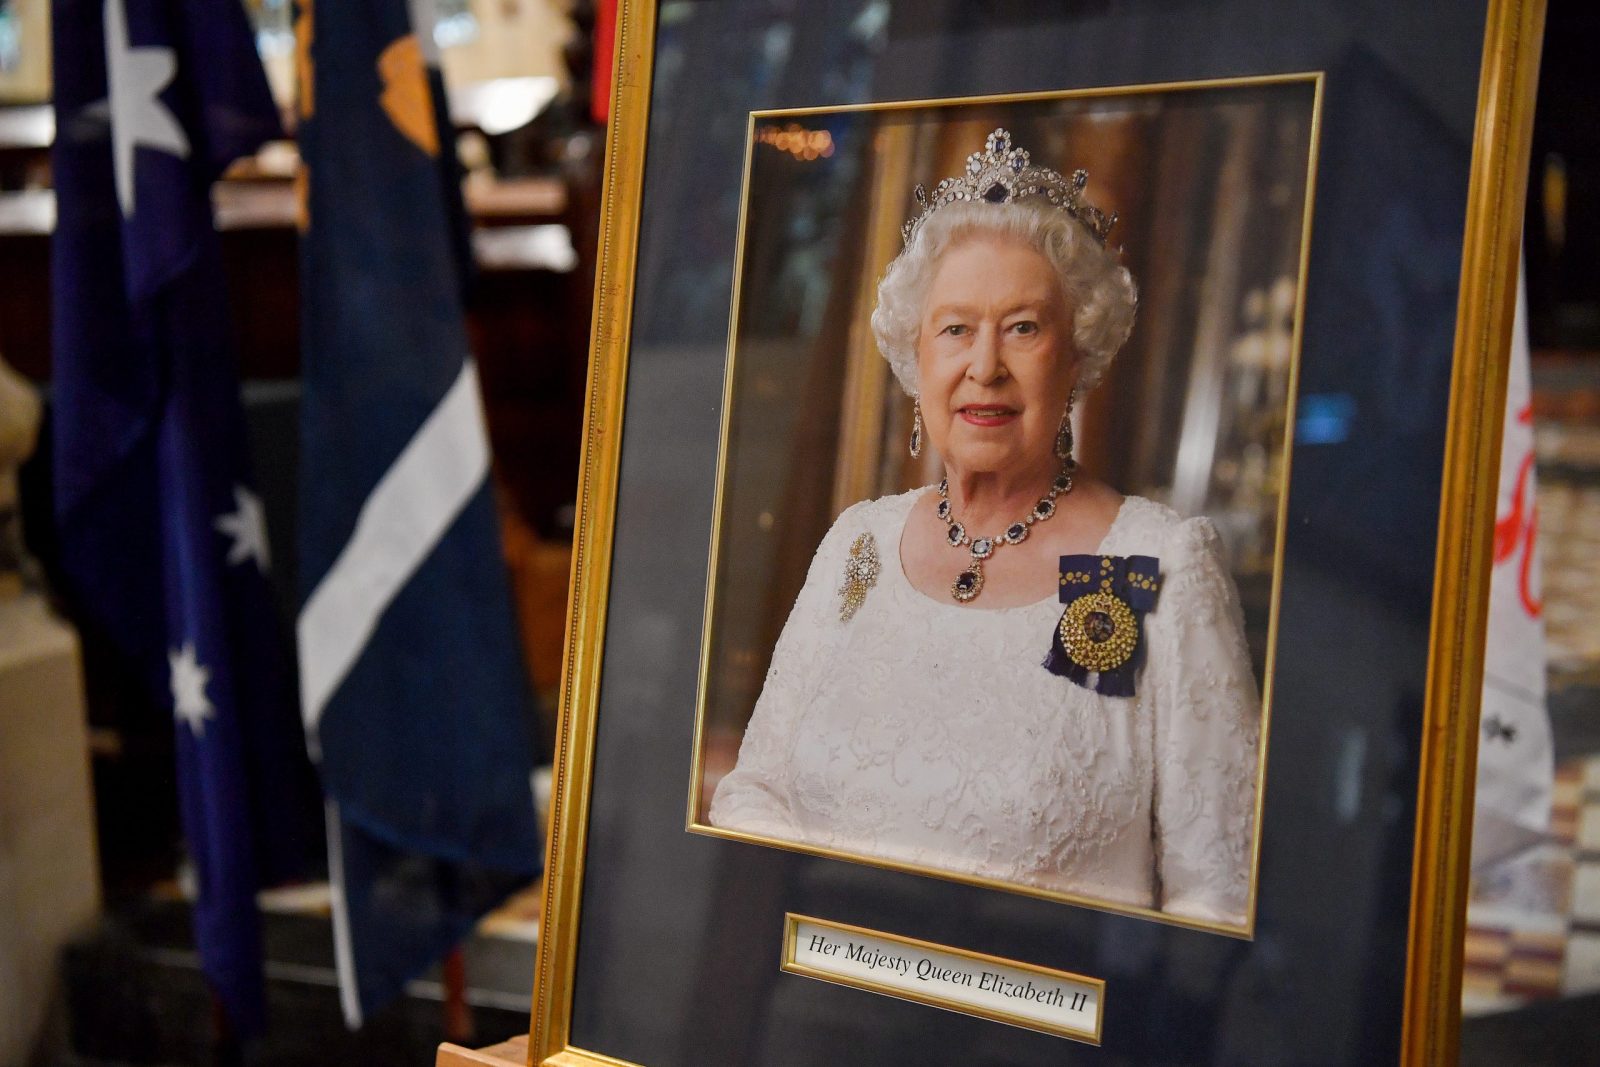 epa10172028 A photograph of Queen Elizabeth II is displayed at St. Andrew's Cathedral in Sydney, Australia, 09 September 2022. According to a statement issued by Buckingham Palace on 08 September 2022, Britain's Queen Elizabeth II has died at her Scottish estate, Balmoral Castle, on 08 September 2022. The 96-year-old Queen was the longest-reigning monarch in British history.  EPA/BIANCA DE MARCHI AUSTRALIA AND NEW ZEALAND OUT